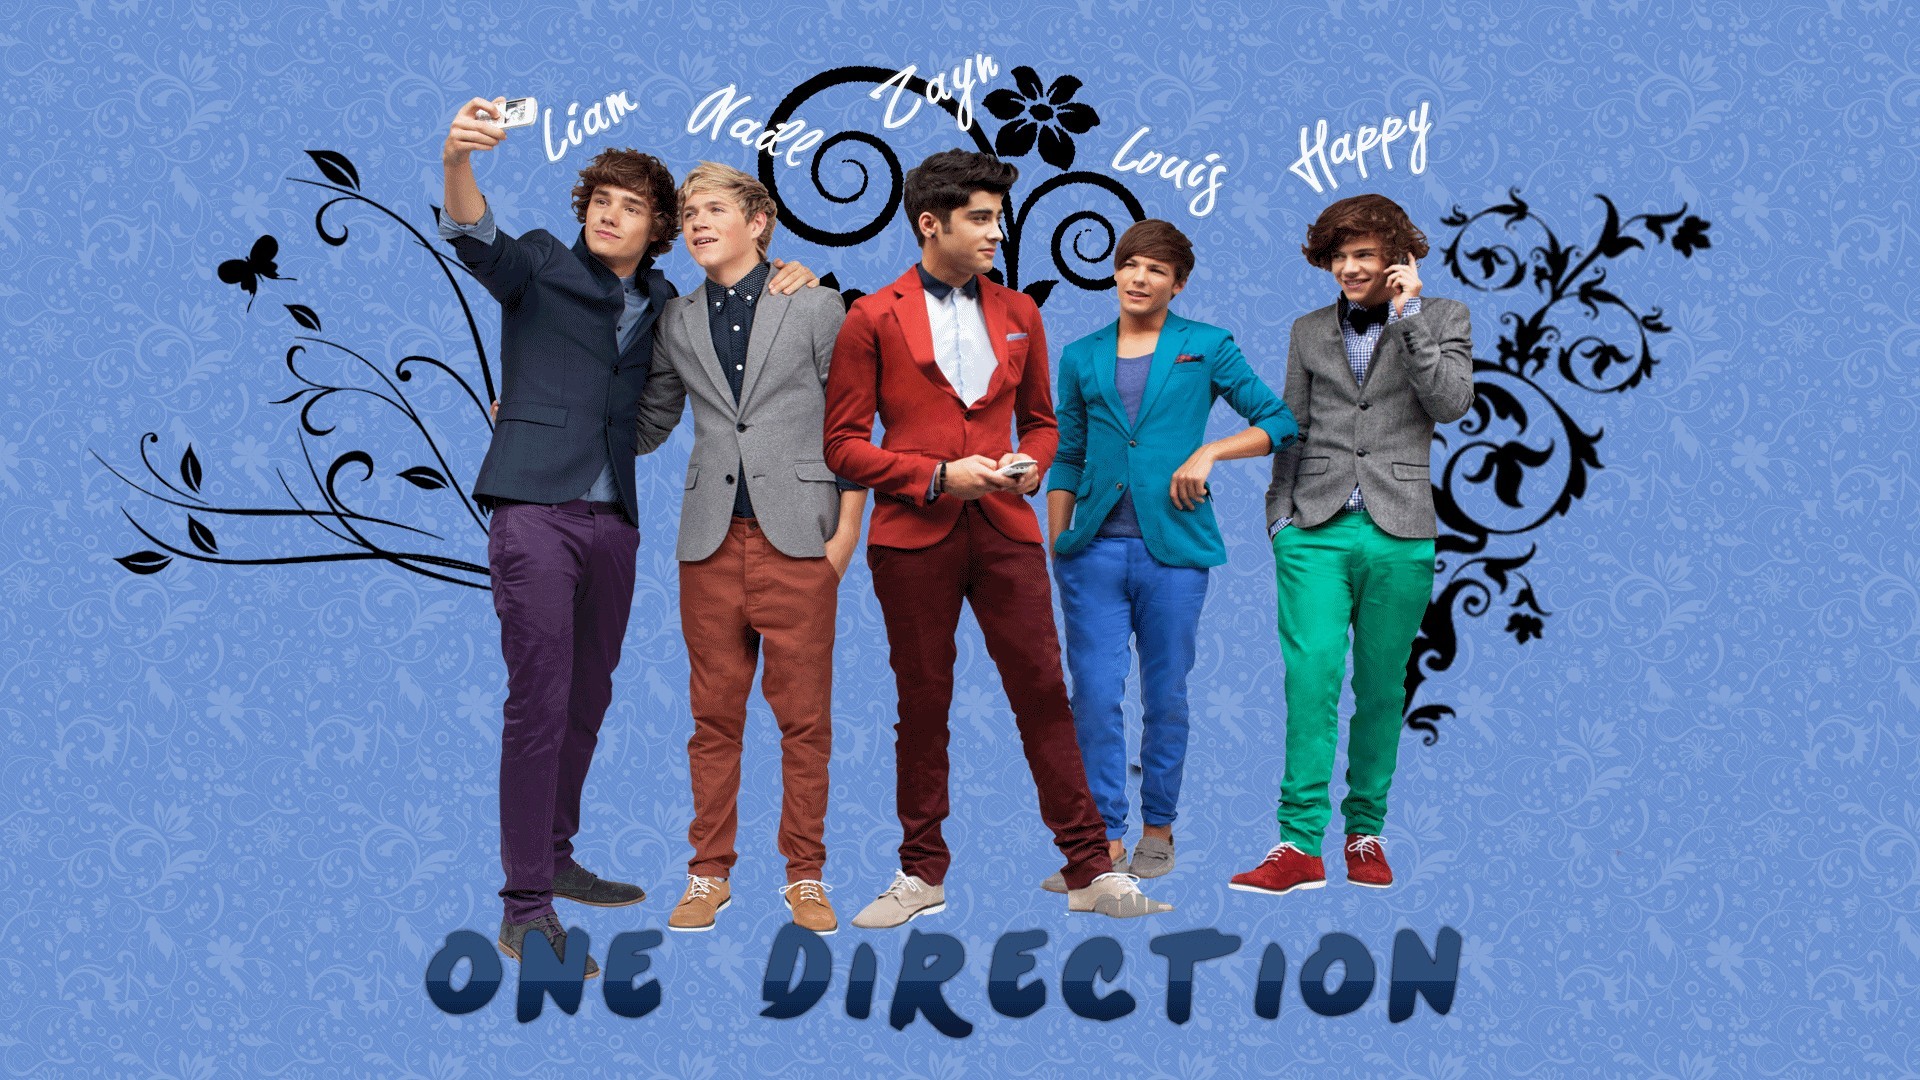 1920x1080 One Direction HD Wallpaper - Wallpapers Points